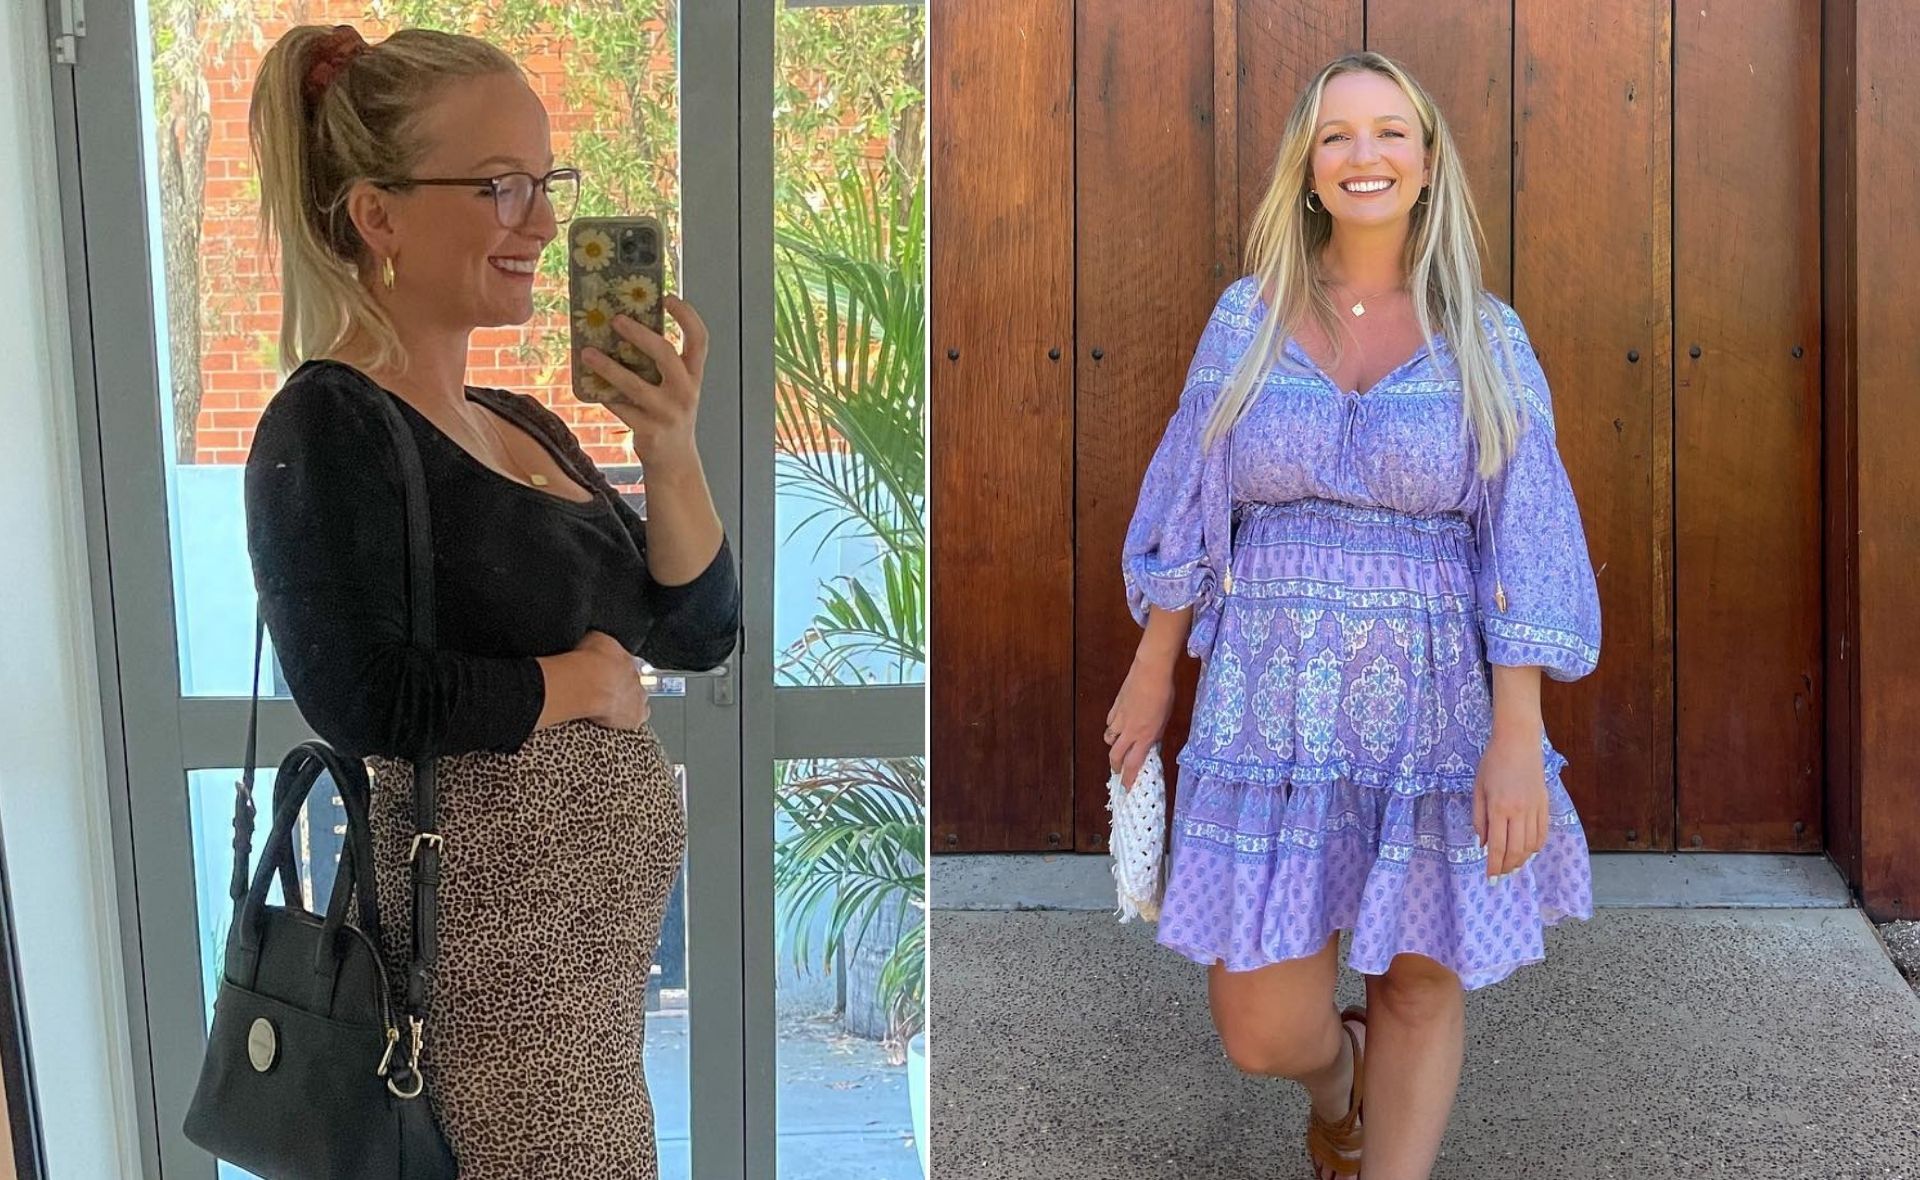 Becky Miles muses on the highs and lows of pregnancy in a candid message